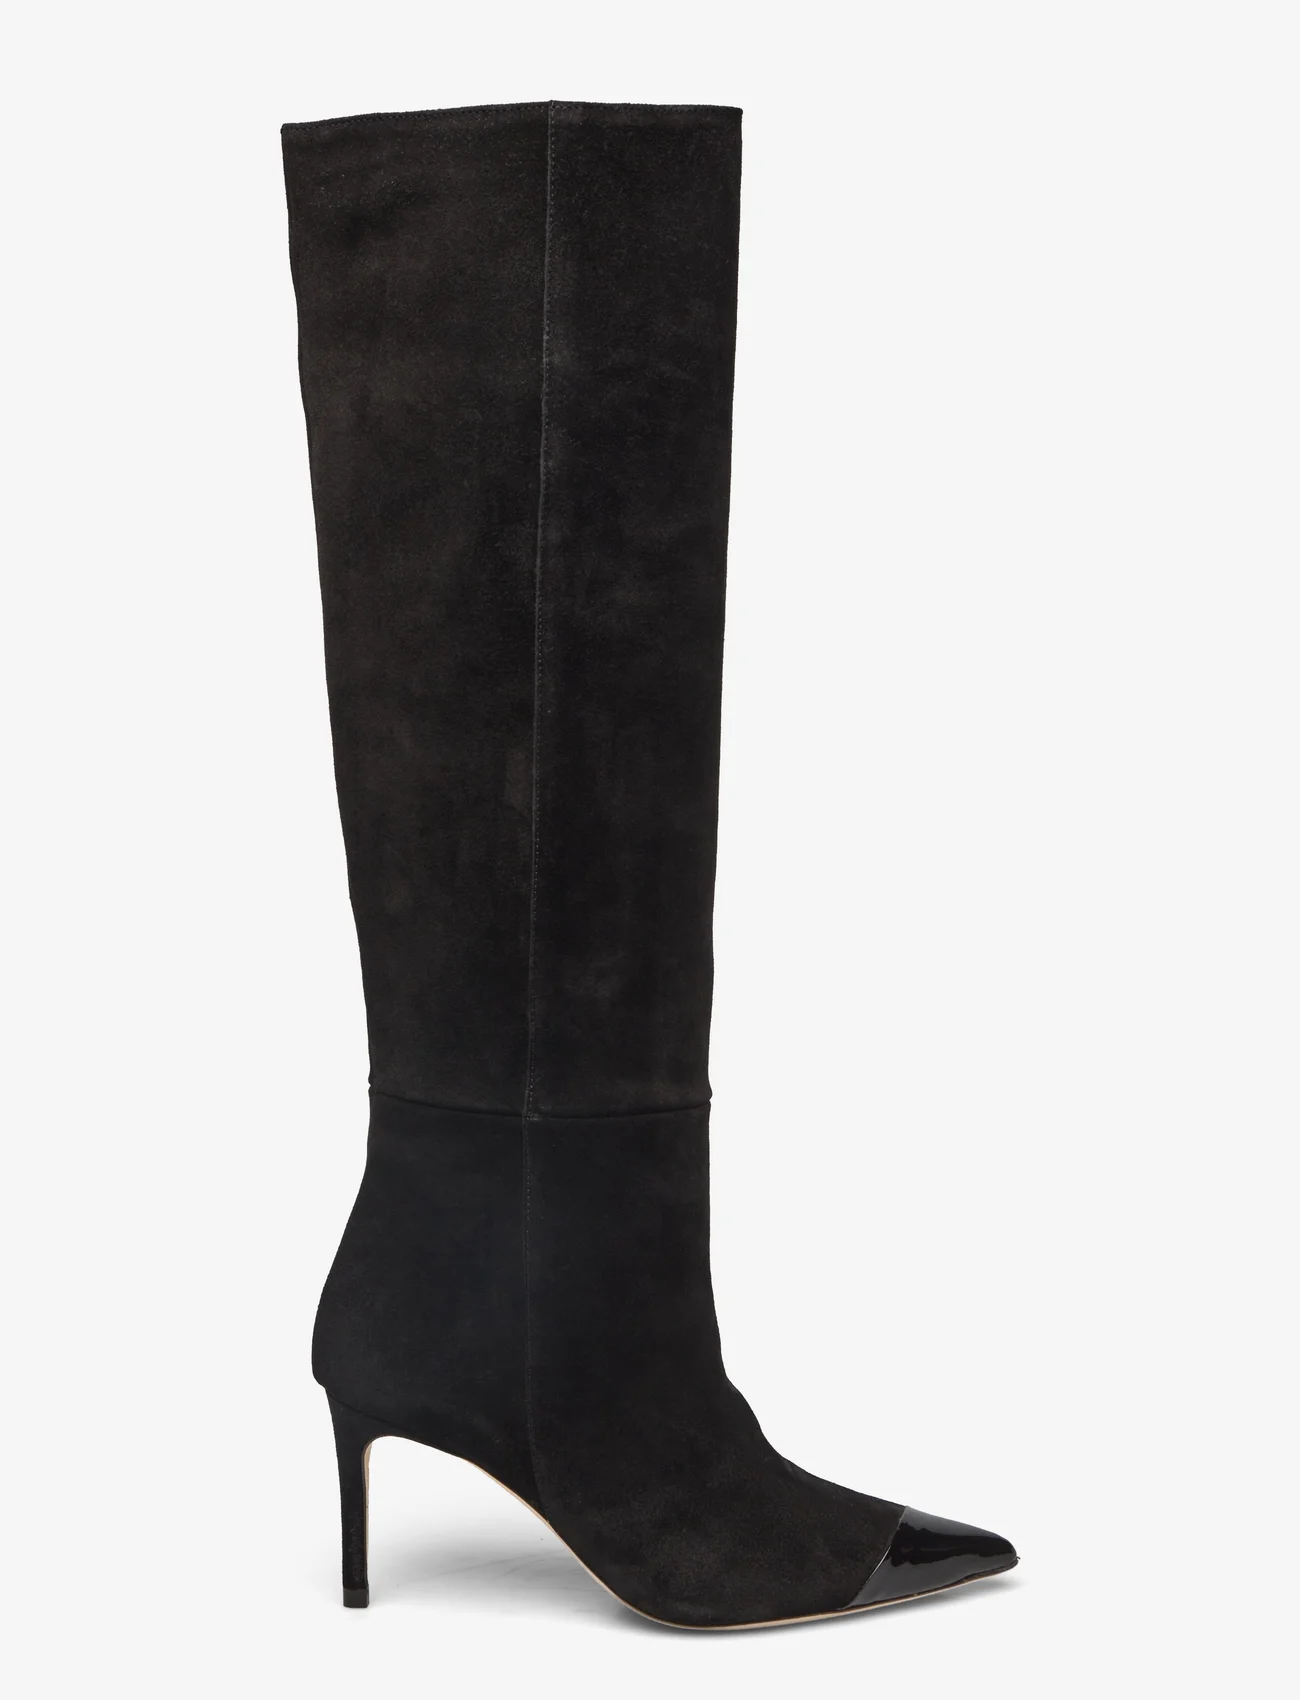 Custommade - Alia Suede - knee high boots - 999 anthracite black - 1